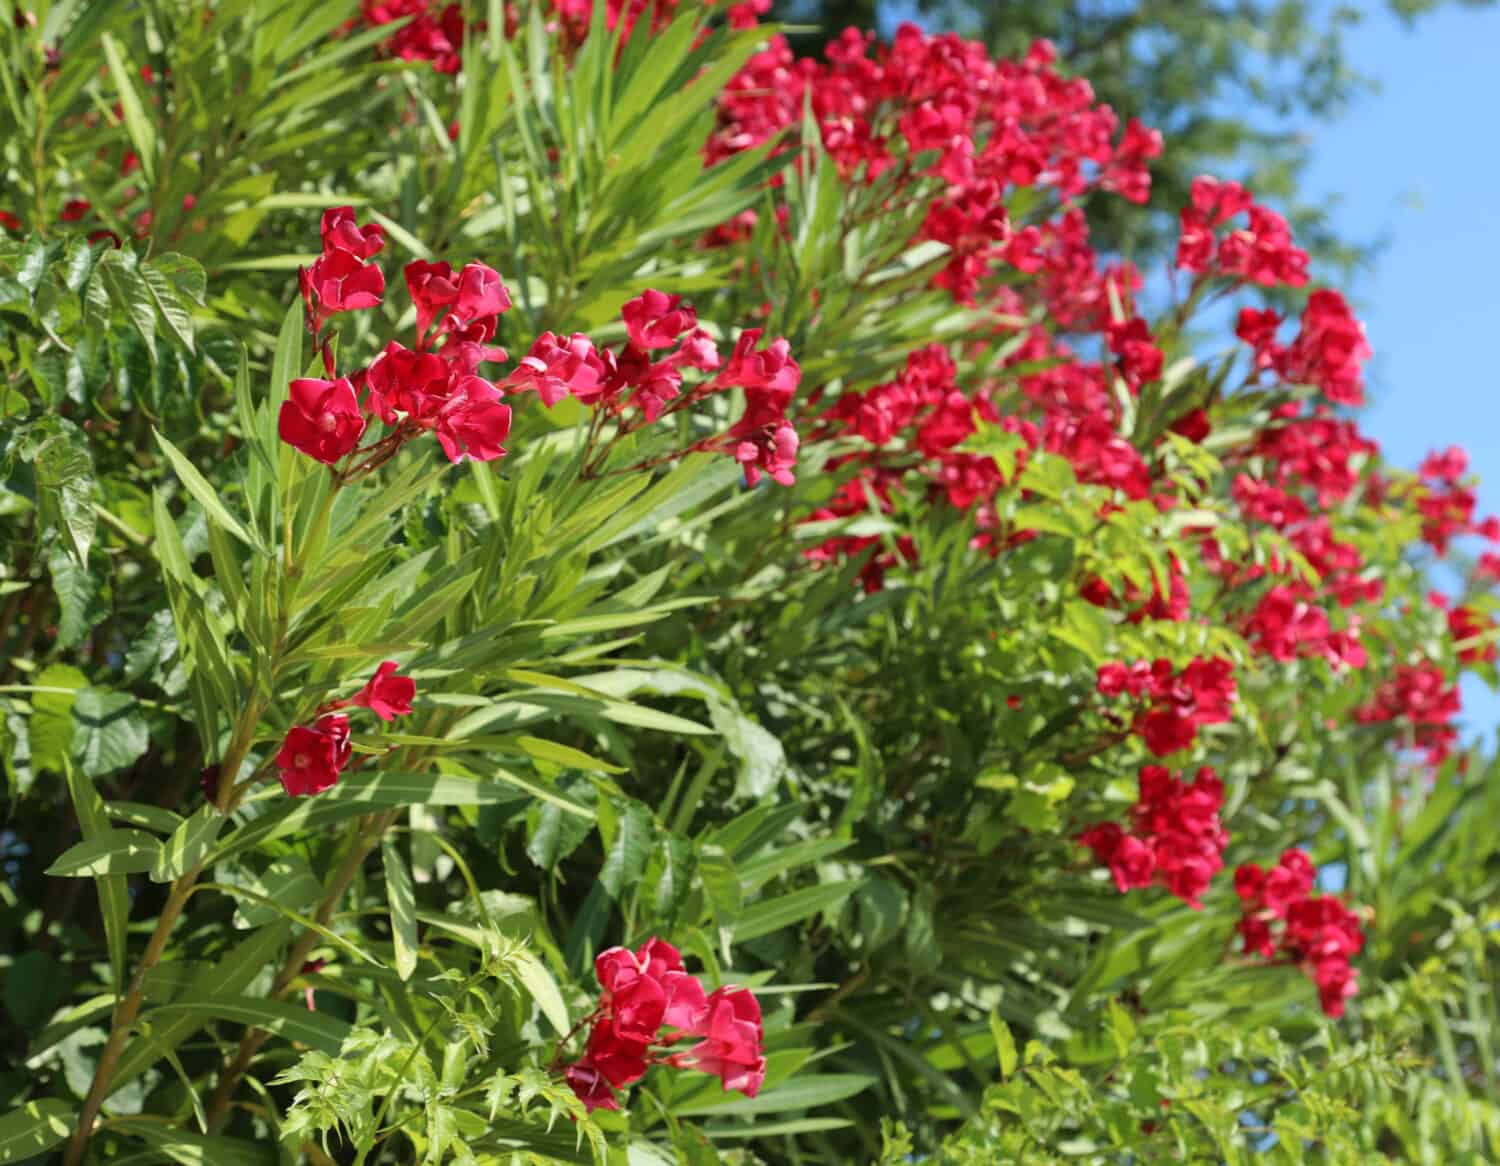 typical deep red Oleander flowers from the Mediterranean area in summer